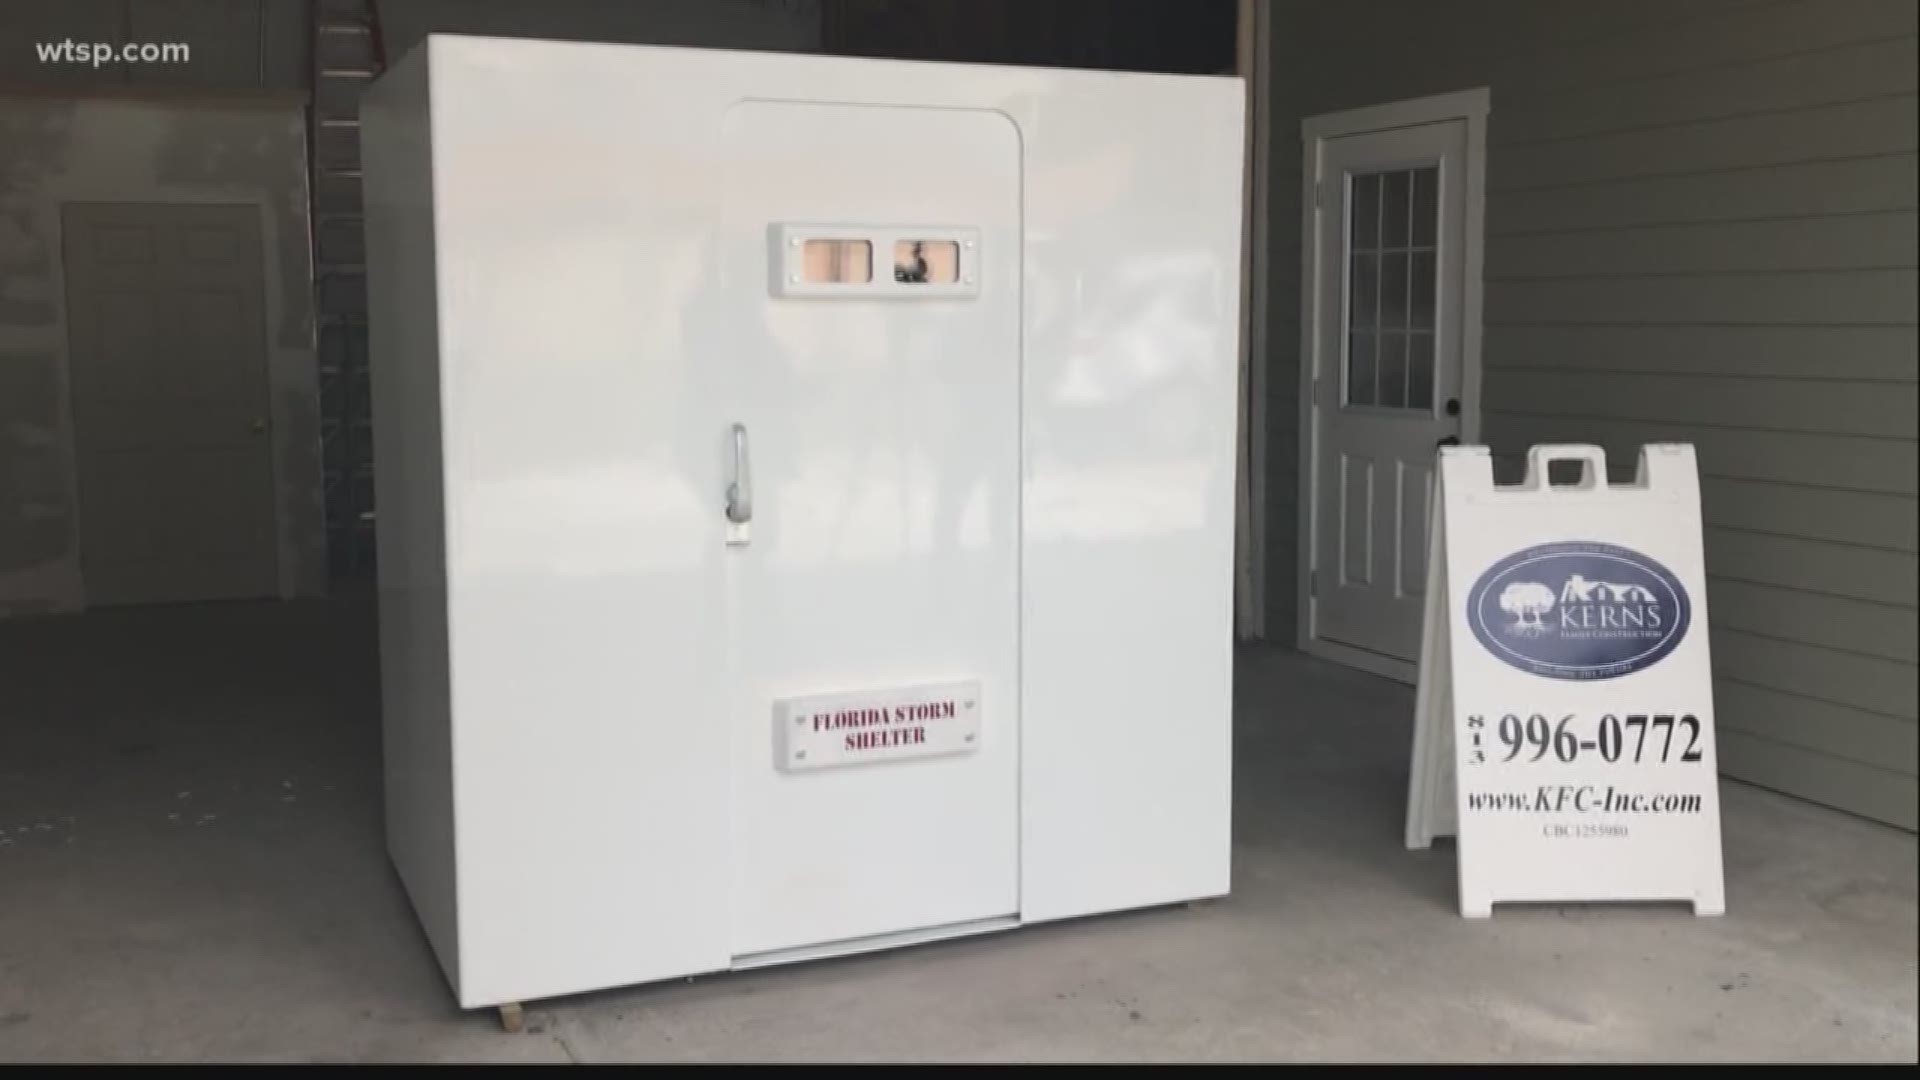 How far are you willing to go to prepare for a hurricane? A company in Zephyrhills is now selling this: a steel-reinforced shelter they say can withstand a Category 5 storm. It's only meant to hold up against winds, not storm surge, however.